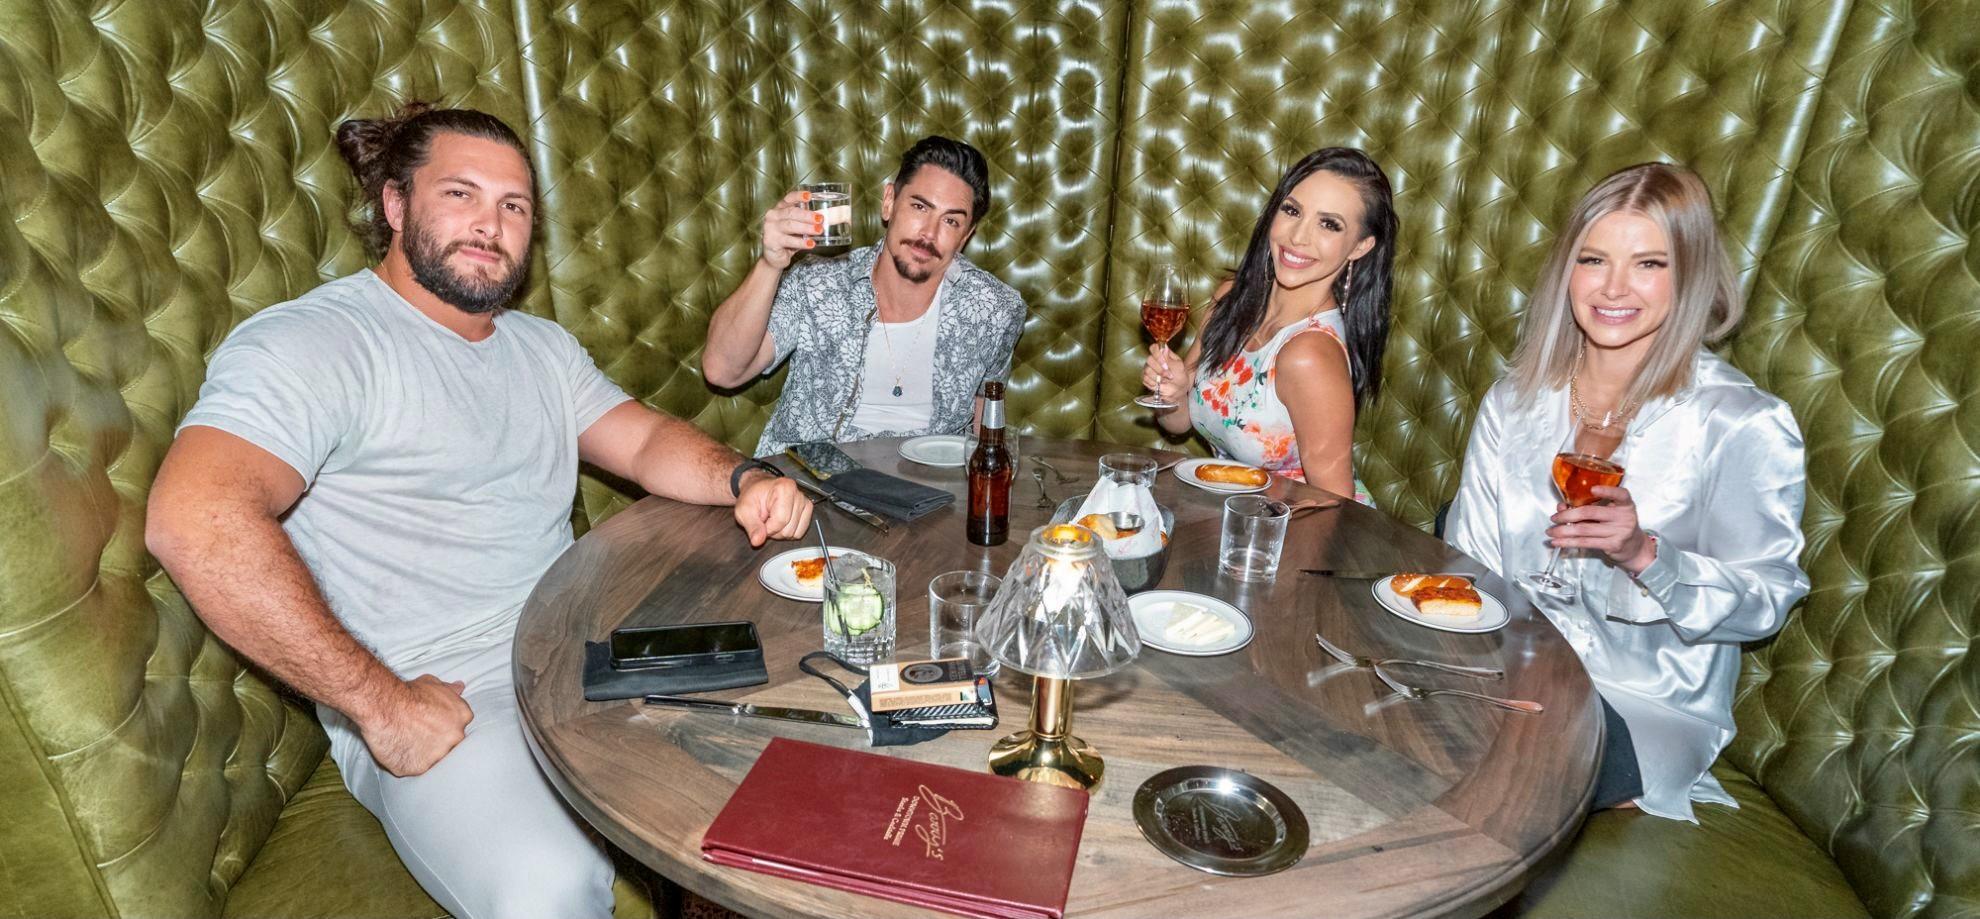 ‘Vanderpump Rules’ Cast Parties In Downtown Vegas For ‘Life is Beautiful’ Festival